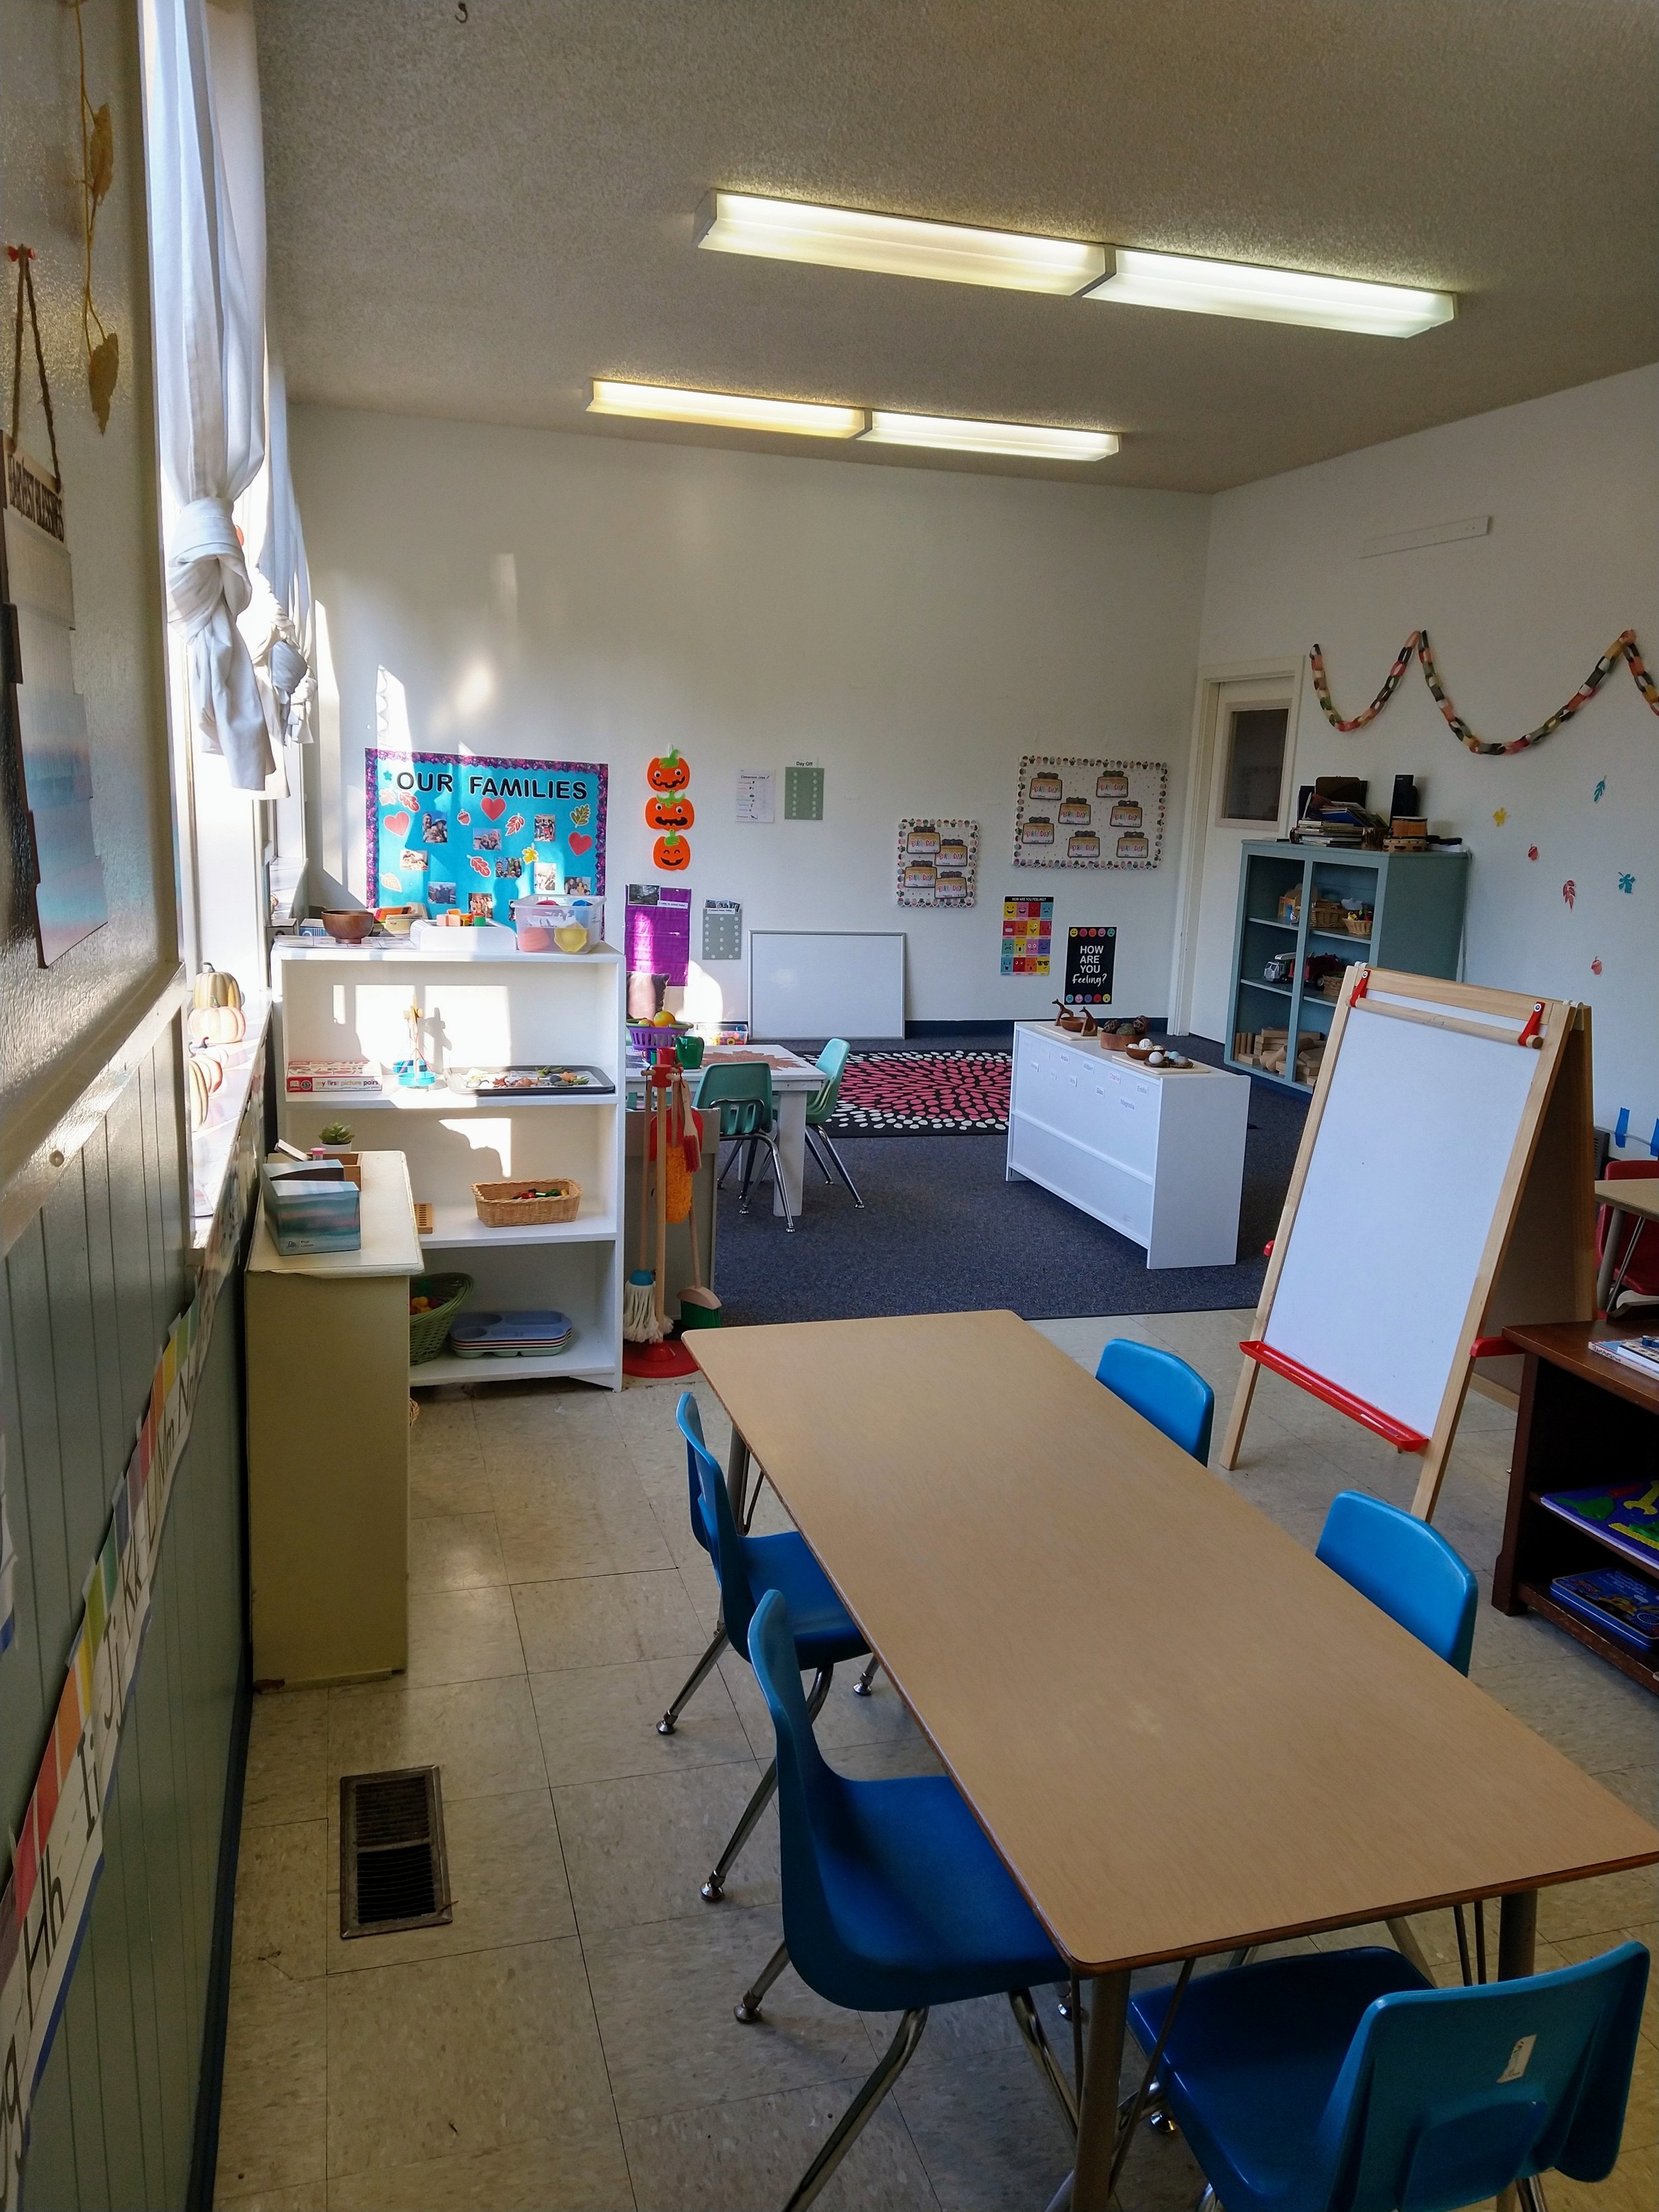  An open classroom with light coming through large windows, a toddler table, and an art easel. 